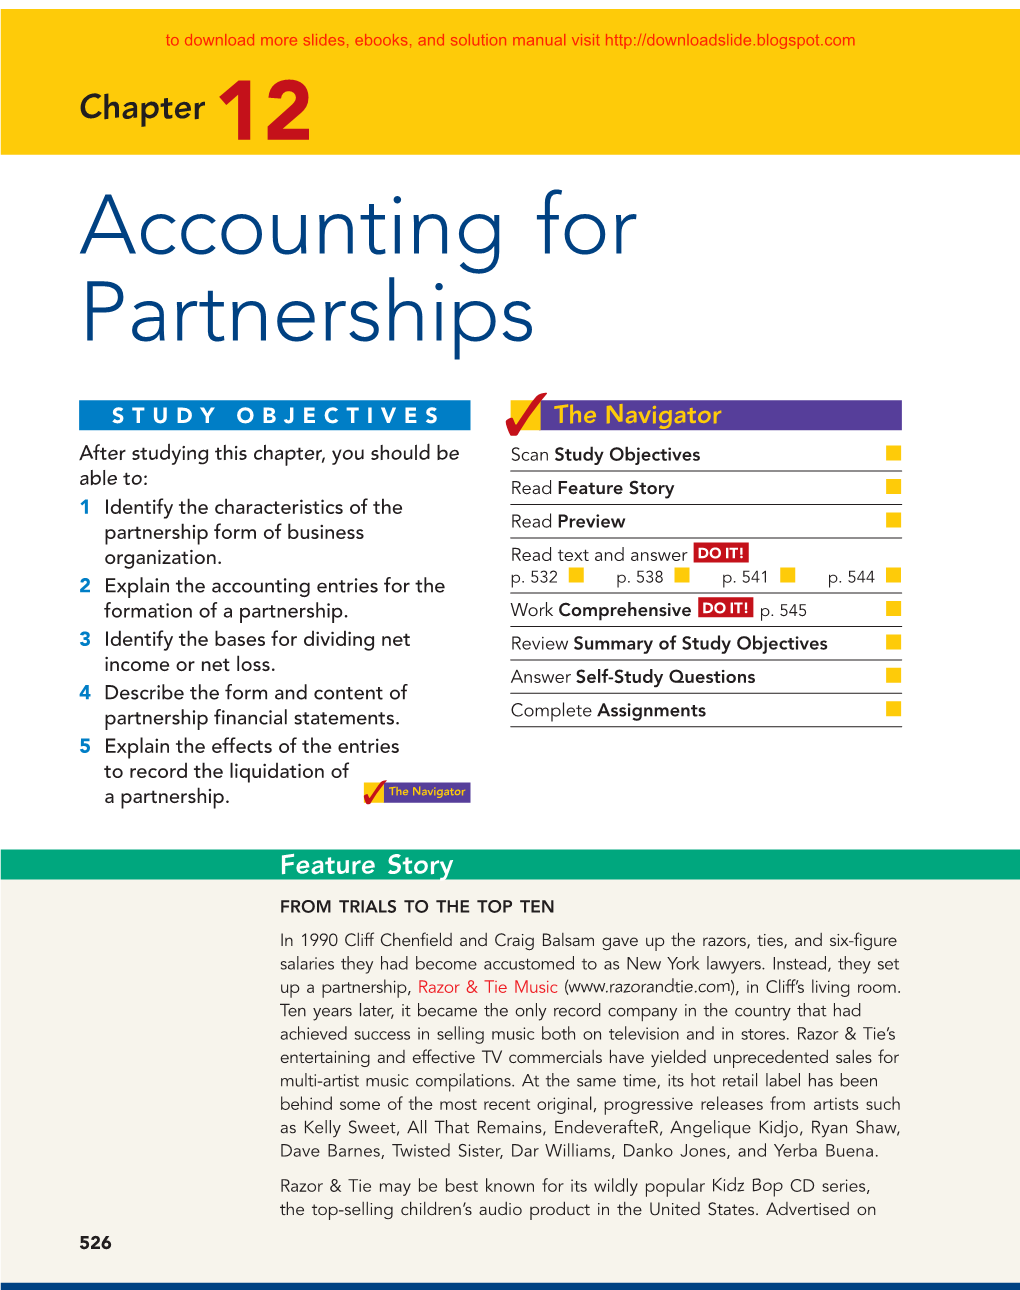 Chapter 12 Accounting for Partnerships